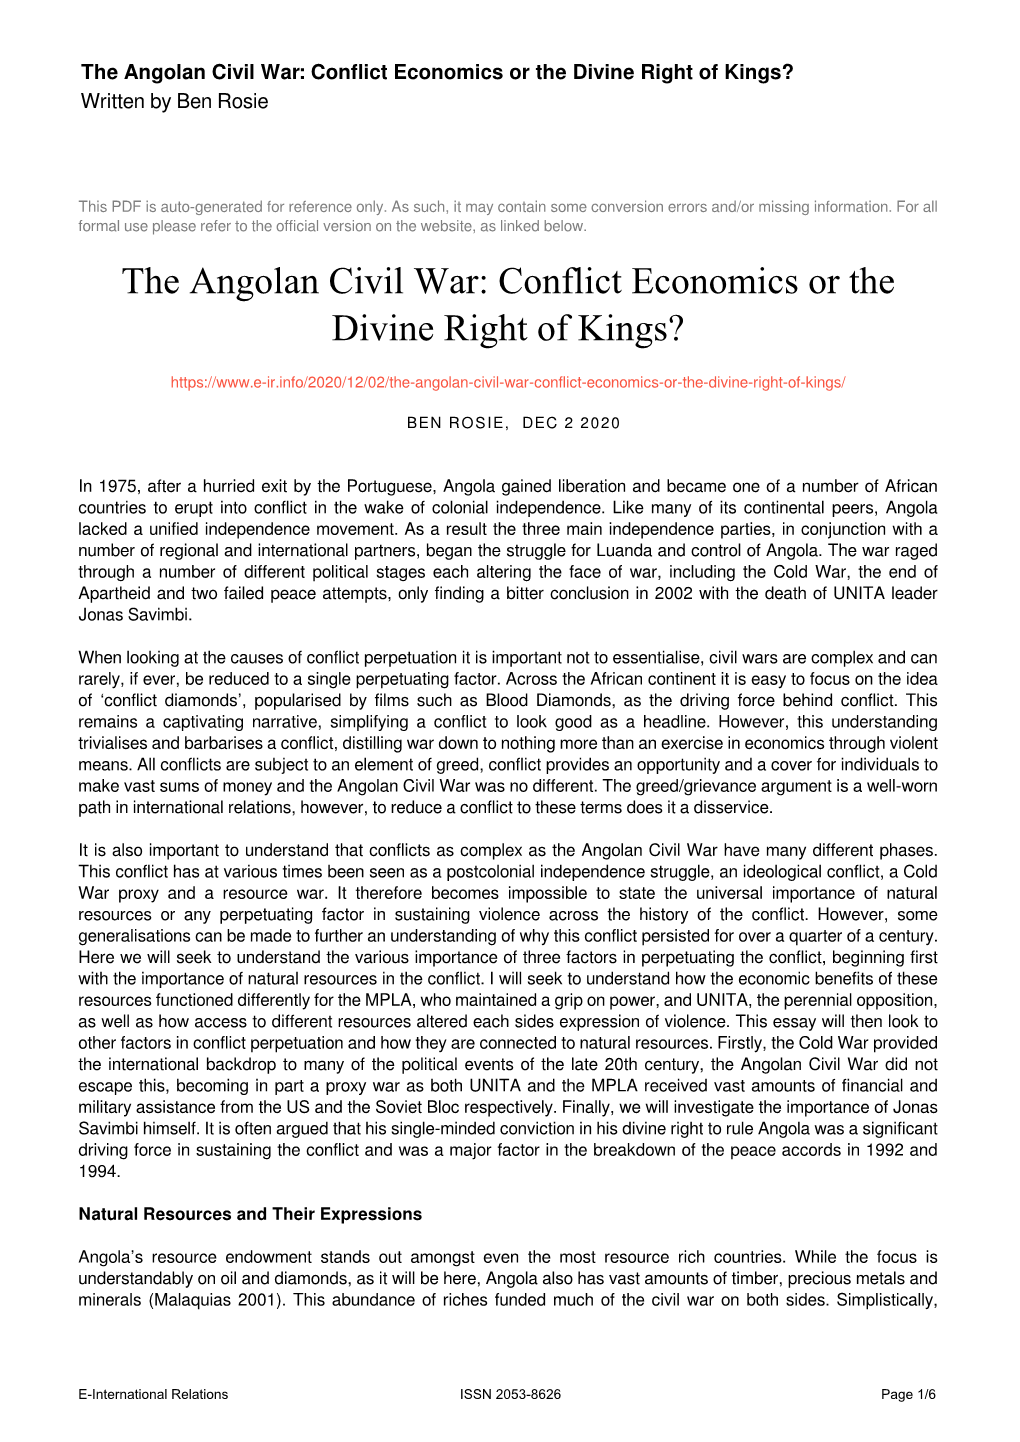 The Angolan Civil War: Conflict Economics Or the Divine Right of Kings? Written by Ben Rosie